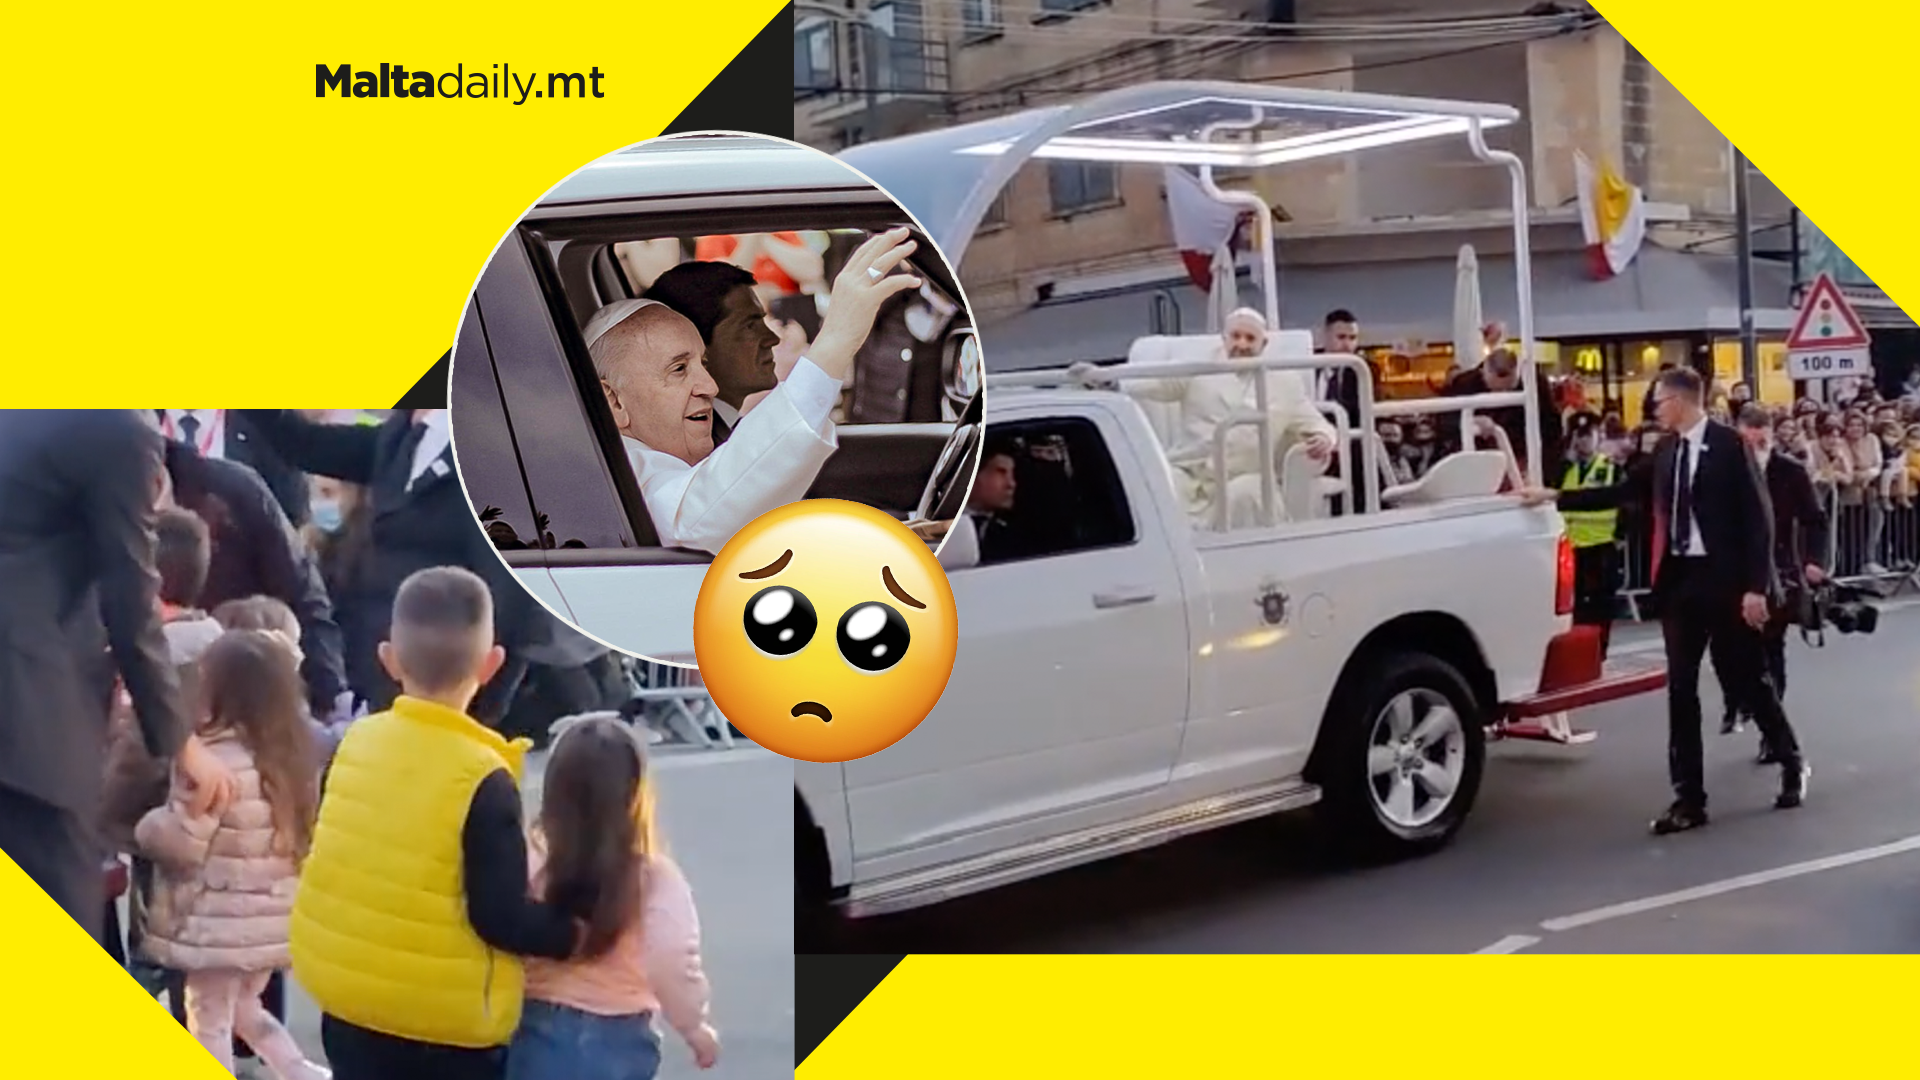 WATCH: Pope Francis stopped Pope mobile to greet children in Gozo